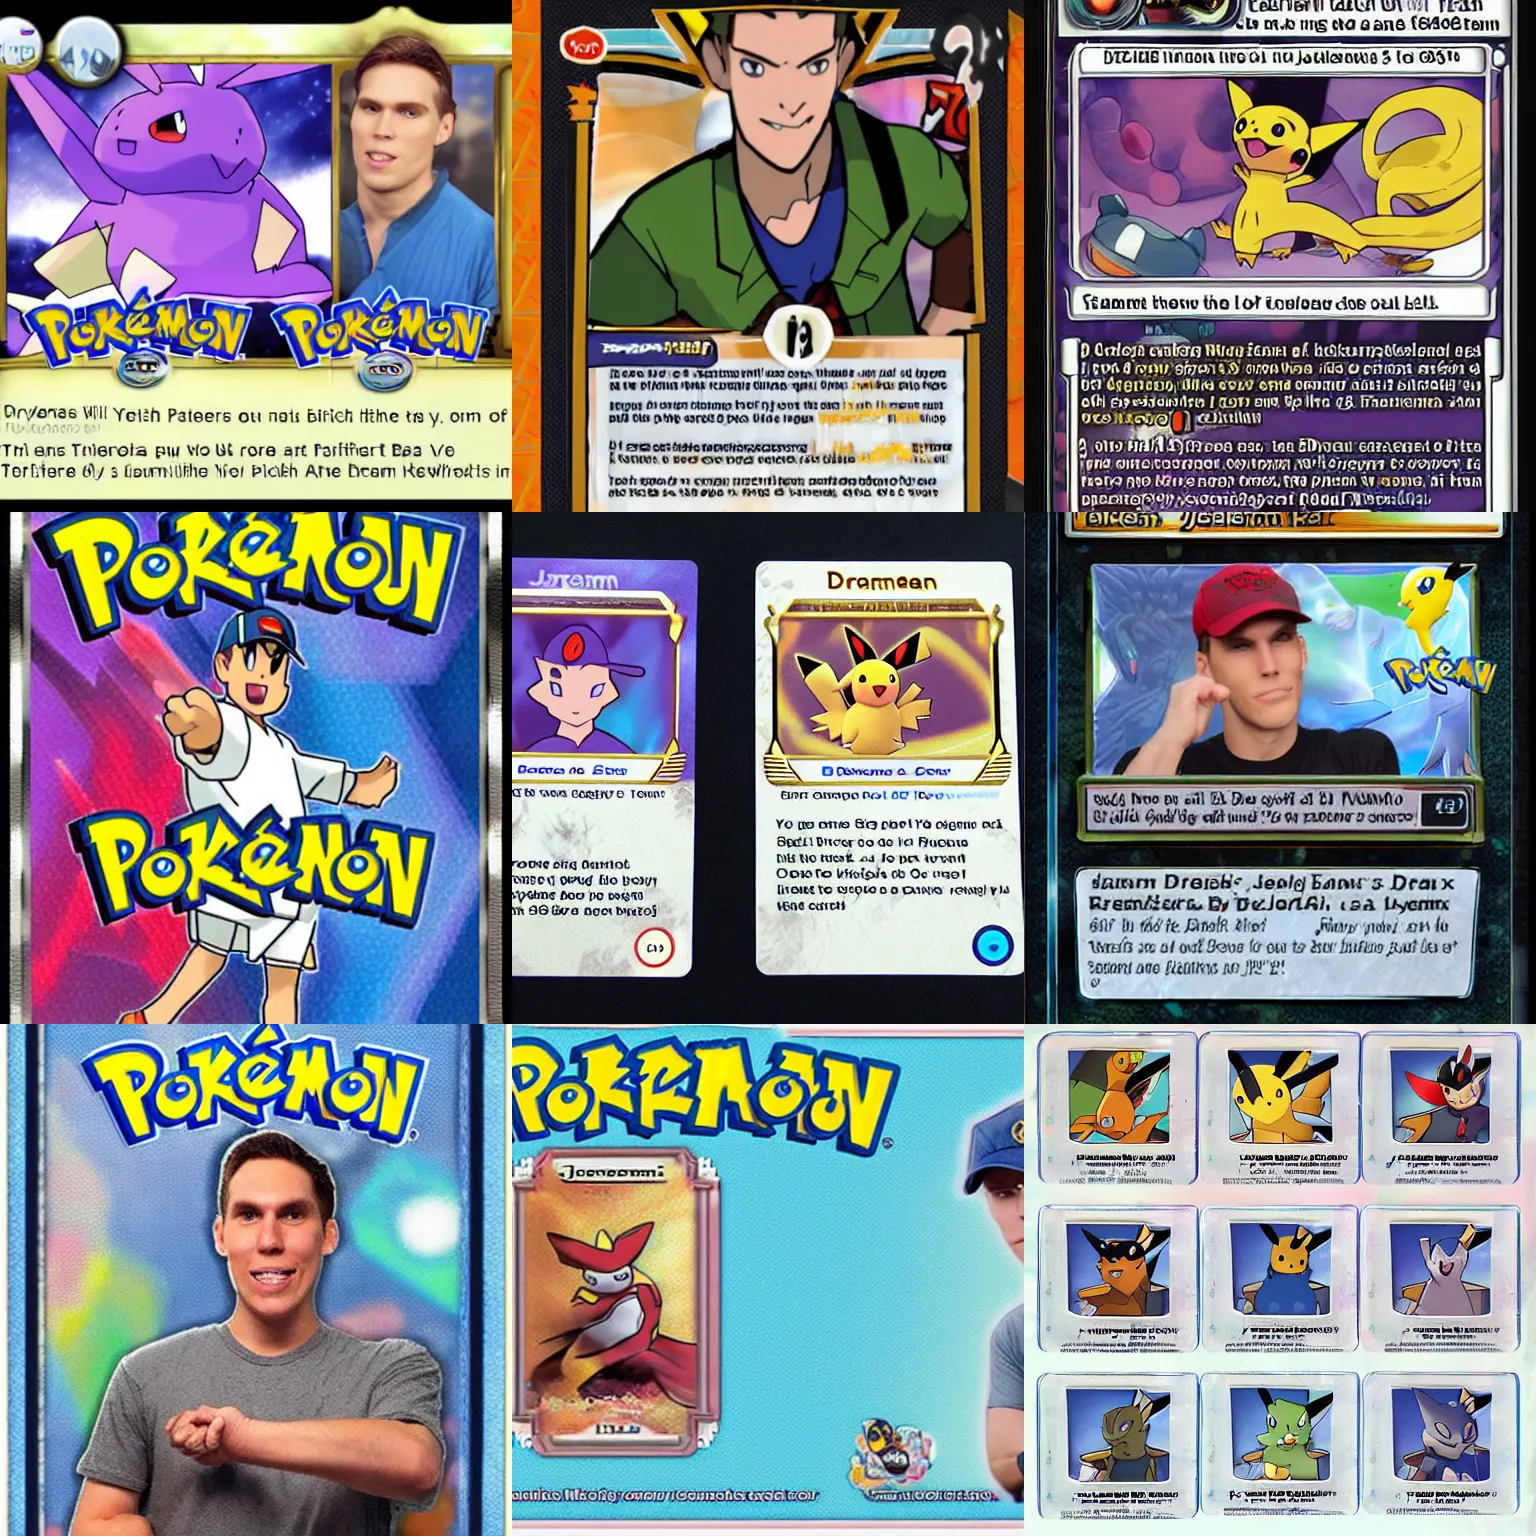 Prompt: !dream a pokemon card of the twitch streamer named Jerma985